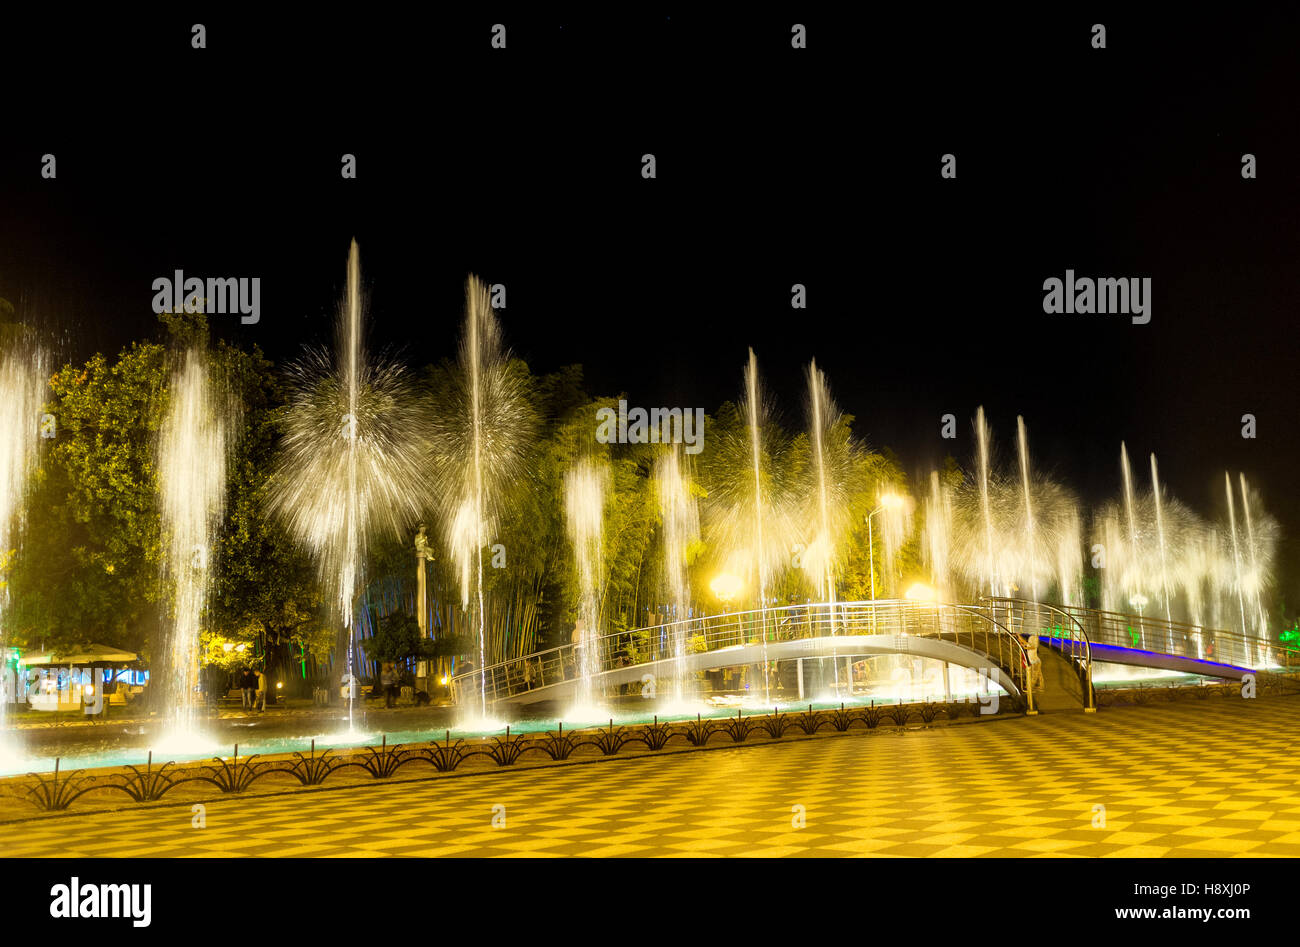 The dancing fountains created the figures, looking like the palm trees, during the show in Seaside Park, Batumi, Georgia. Stock Photo